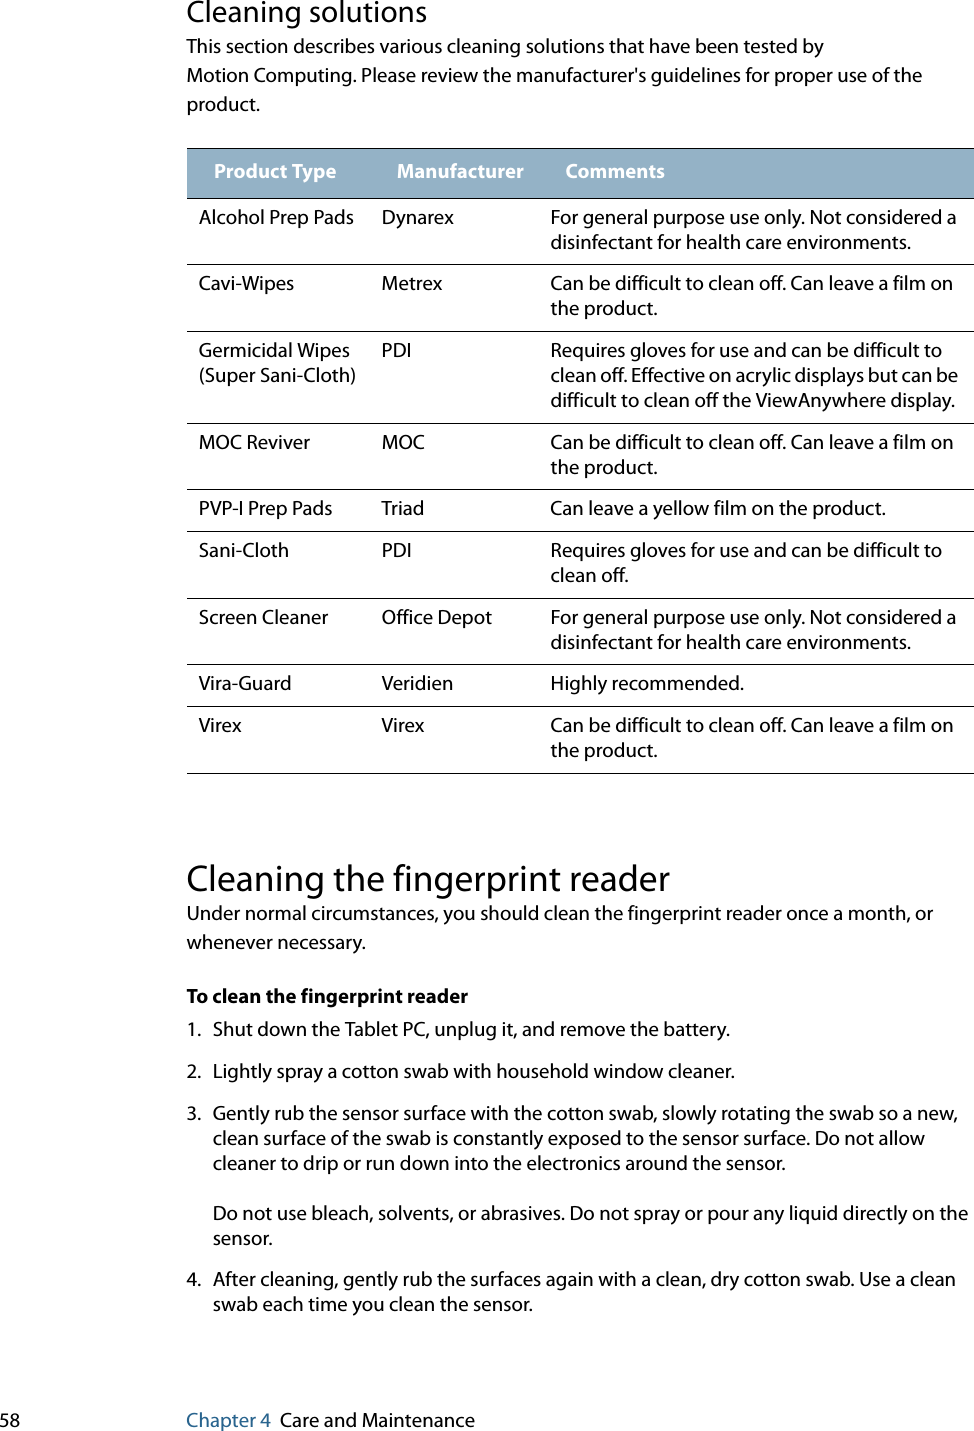 58 Chapter 4 Care and MaintenanceCleaning solutionsThis section describes various cleaning solutions that have been tested by Motion Computing. Please review the manufacturer&apos;s guidelines for proper use of the product.Cleaning the fingerprint readerUnder normal circumstances, you should clean the fingerprint reader once a month, or whenever necessary.To clean the fingerprint reader1. Shut down the Tablet PC, unplug it, and remove the battery.2. Lightly spray a cotton swab with household window cleaner.3. Gently rub the sensor surface with the cotton swab, slowly rotating the swab so a new, clean surface of the swab is constantly exposed to the sensor surface. Do not allow cleaner to drip or run down into the electronics around the sensor.Do not use bleach, solvents, or abrasives. Do not spray or pour any liquid directly on the sensor.4. After cleaning, gently rub the surfaces again with a clean, dry cotton swab. Use a clean swab each time you clean the sensor.Product Type Manufacturer CommentsAlcohol Prep Pads Dynarex For general purpose use only. Not considered a disinfectant for health care environments.Cavi-Wipes Metrex Can be difficult to clean off. Can leave a film on the product.Germicidal Wipes (Super Sani-Cloth)PDI Requires gloves for use and can be difficult to clean off. Effective on acrylic displays but can be difficult to clean off the ViewAnywhere display.MOC Reviver MOC Can be difficult to clean off. Can leave a film on the product.PVP-I Prep Pads Triad Can leave a yellow film on the product.Sani-Cloth PDI Requires gloves for use and can be difficult to clean off.Screen Cleaner Office Depot For general purpose use only. Not considered a disinfectant for health care environments.Vira-Guard Veridien Highly recommended.Virex Virex Can be difficult to clean off. Can leave a film on the product.